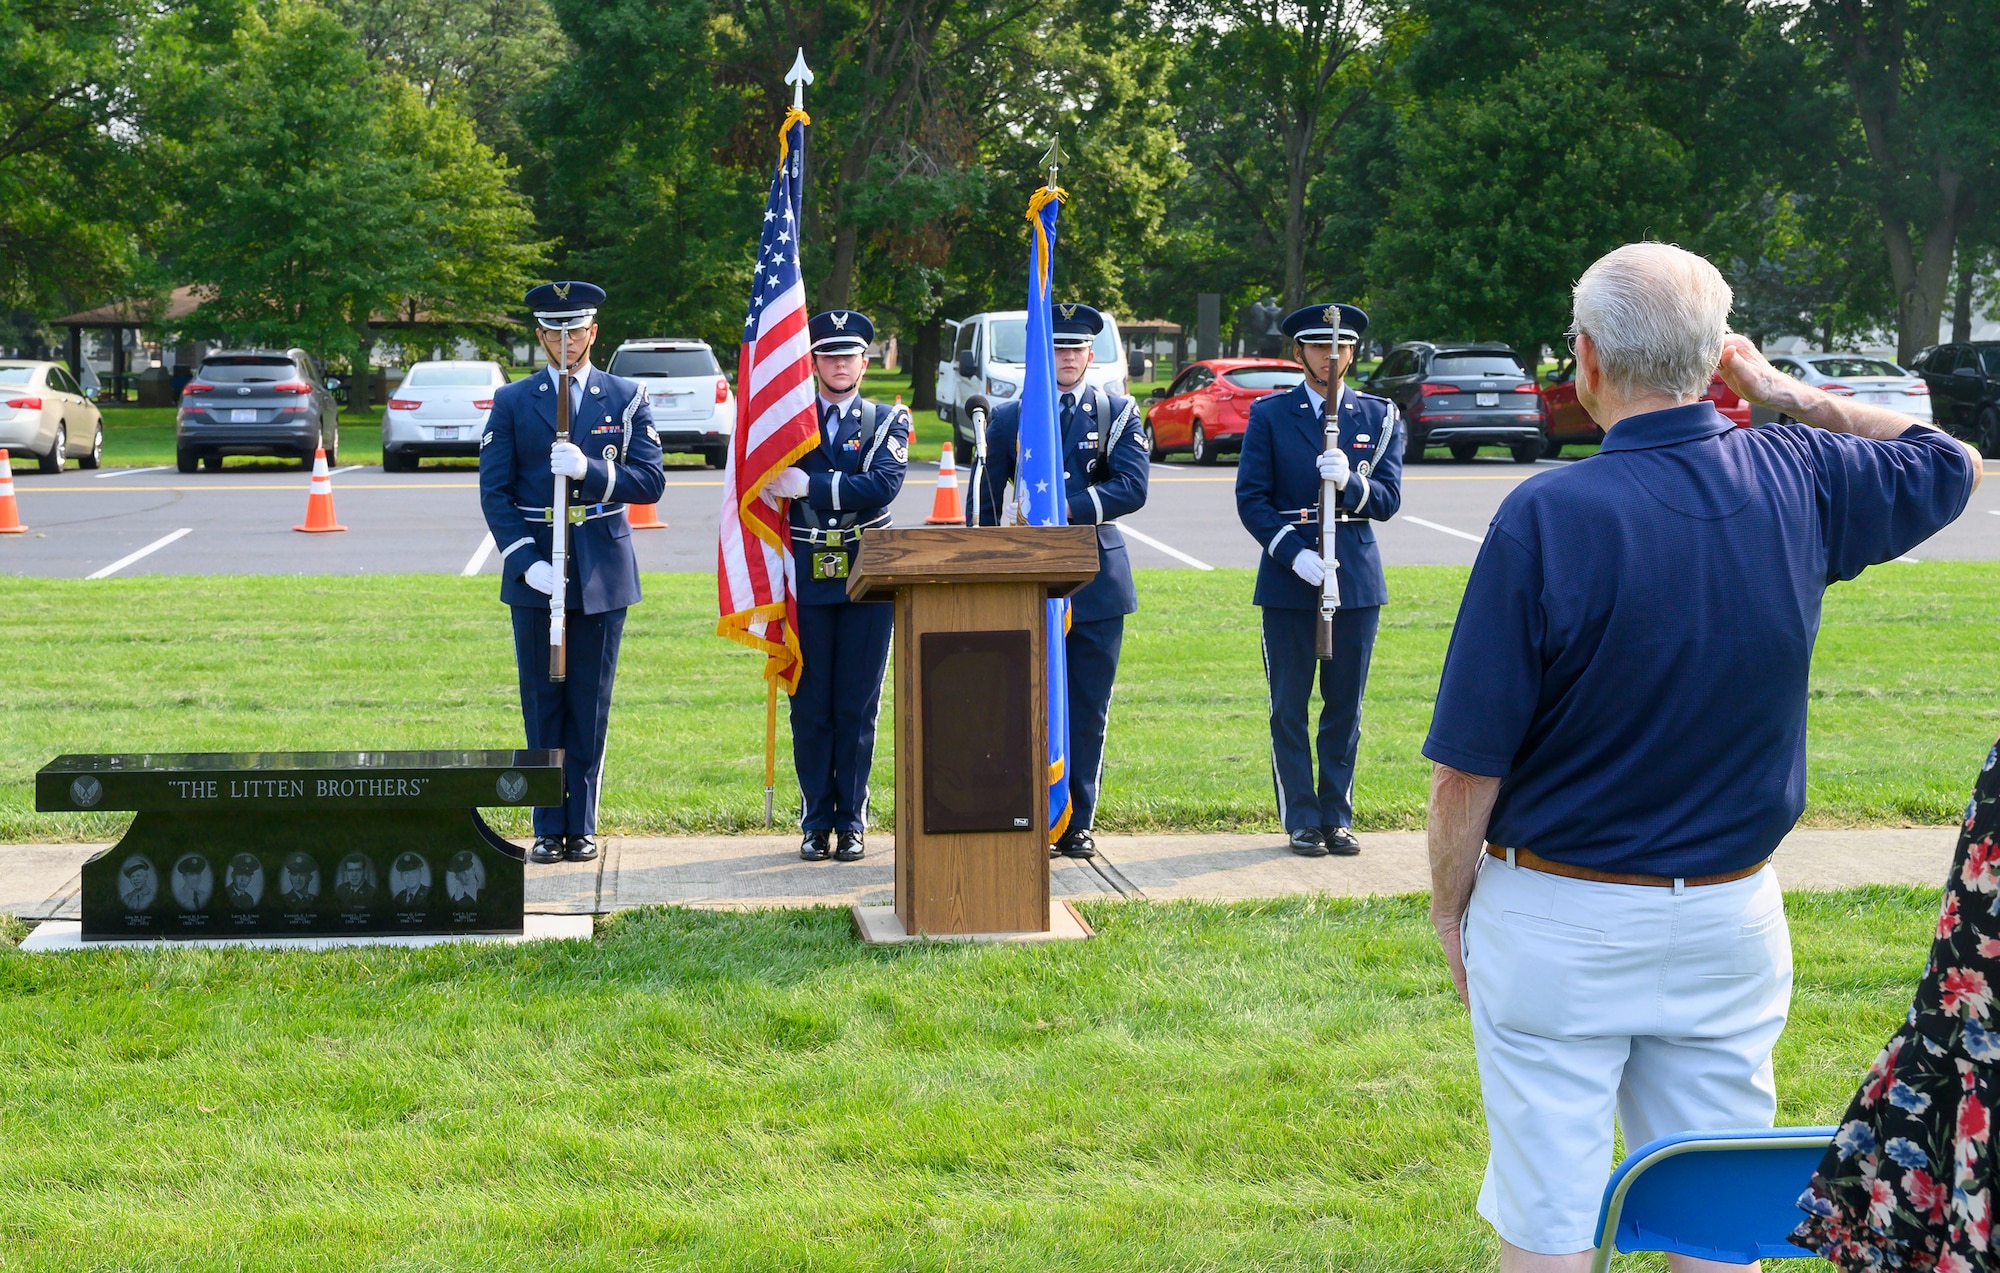 Jerry Litten salutes the flag at the end of a ceremony dedicating a memorial bench at the National Museum of the Air Force, Wright-Patterson Air Force Base, Ohio, honoring him and his brothers. The seven Litten brothers served a combined total of 137 years in the U.S. Air Force. (U.S. Air Force photo by R.J. Oriez)